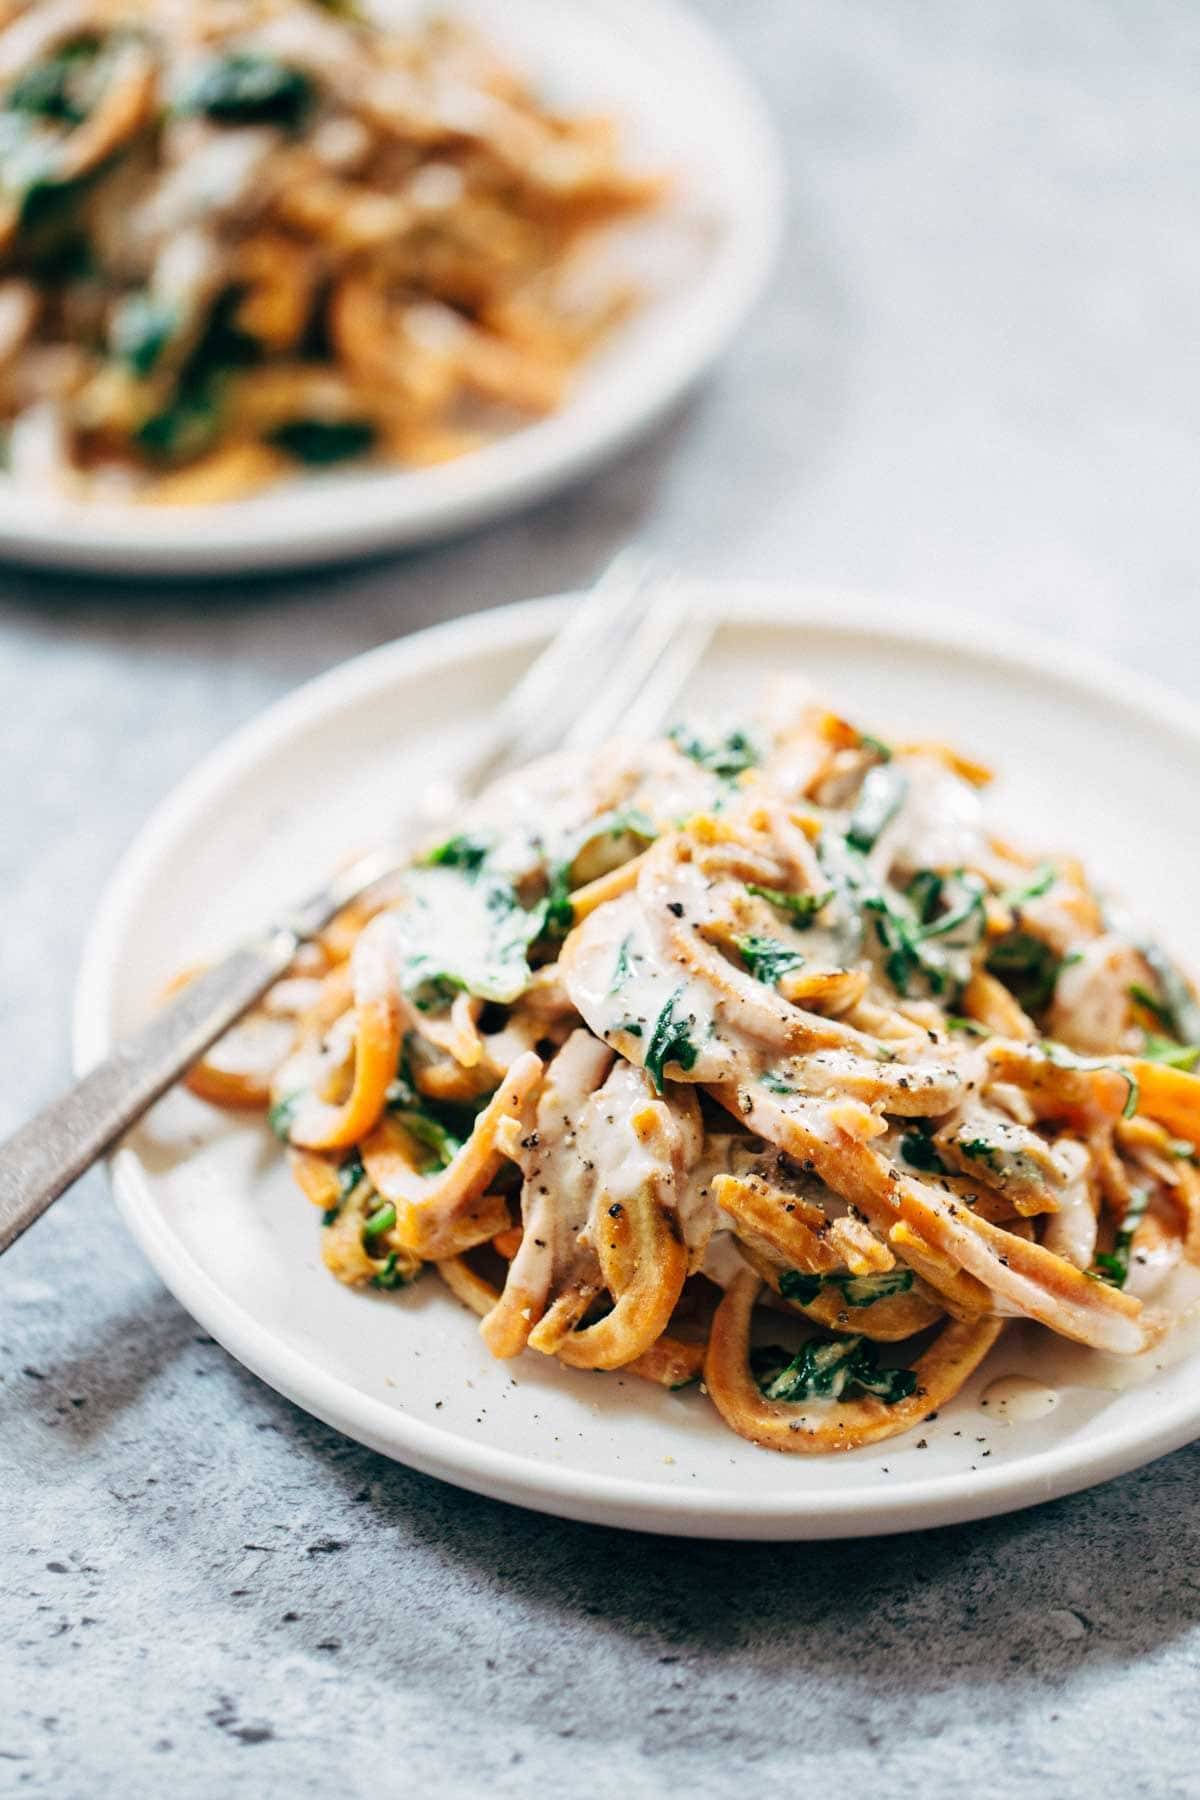 Creamy Spinach and Sweet Potato Noodles with Cashew Sauce - easy to make, adaptable, gluten free, vegan. Devine and delicious! | pinchofyum.com